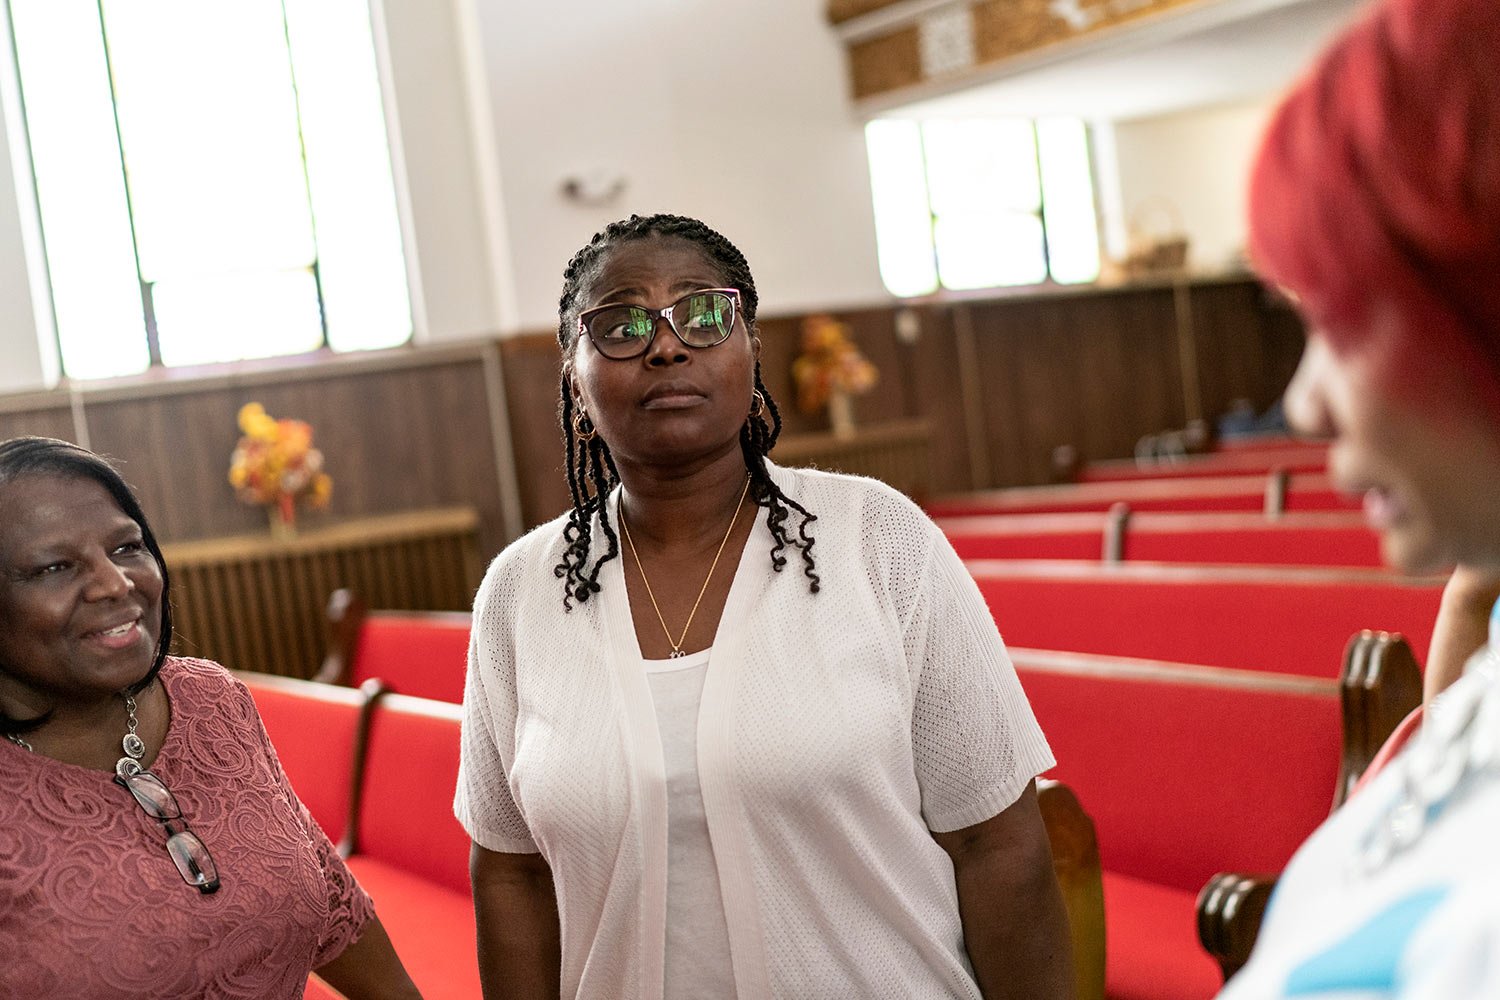  Tameka Felts, center, a church trustee who also is licensed to carry a gun, talks with congregants following a service at Trinity Baptist church Sunday, Aug. 20, 2023, in Niagara Falls, N.Y. (AP Photo/David Goldman)  